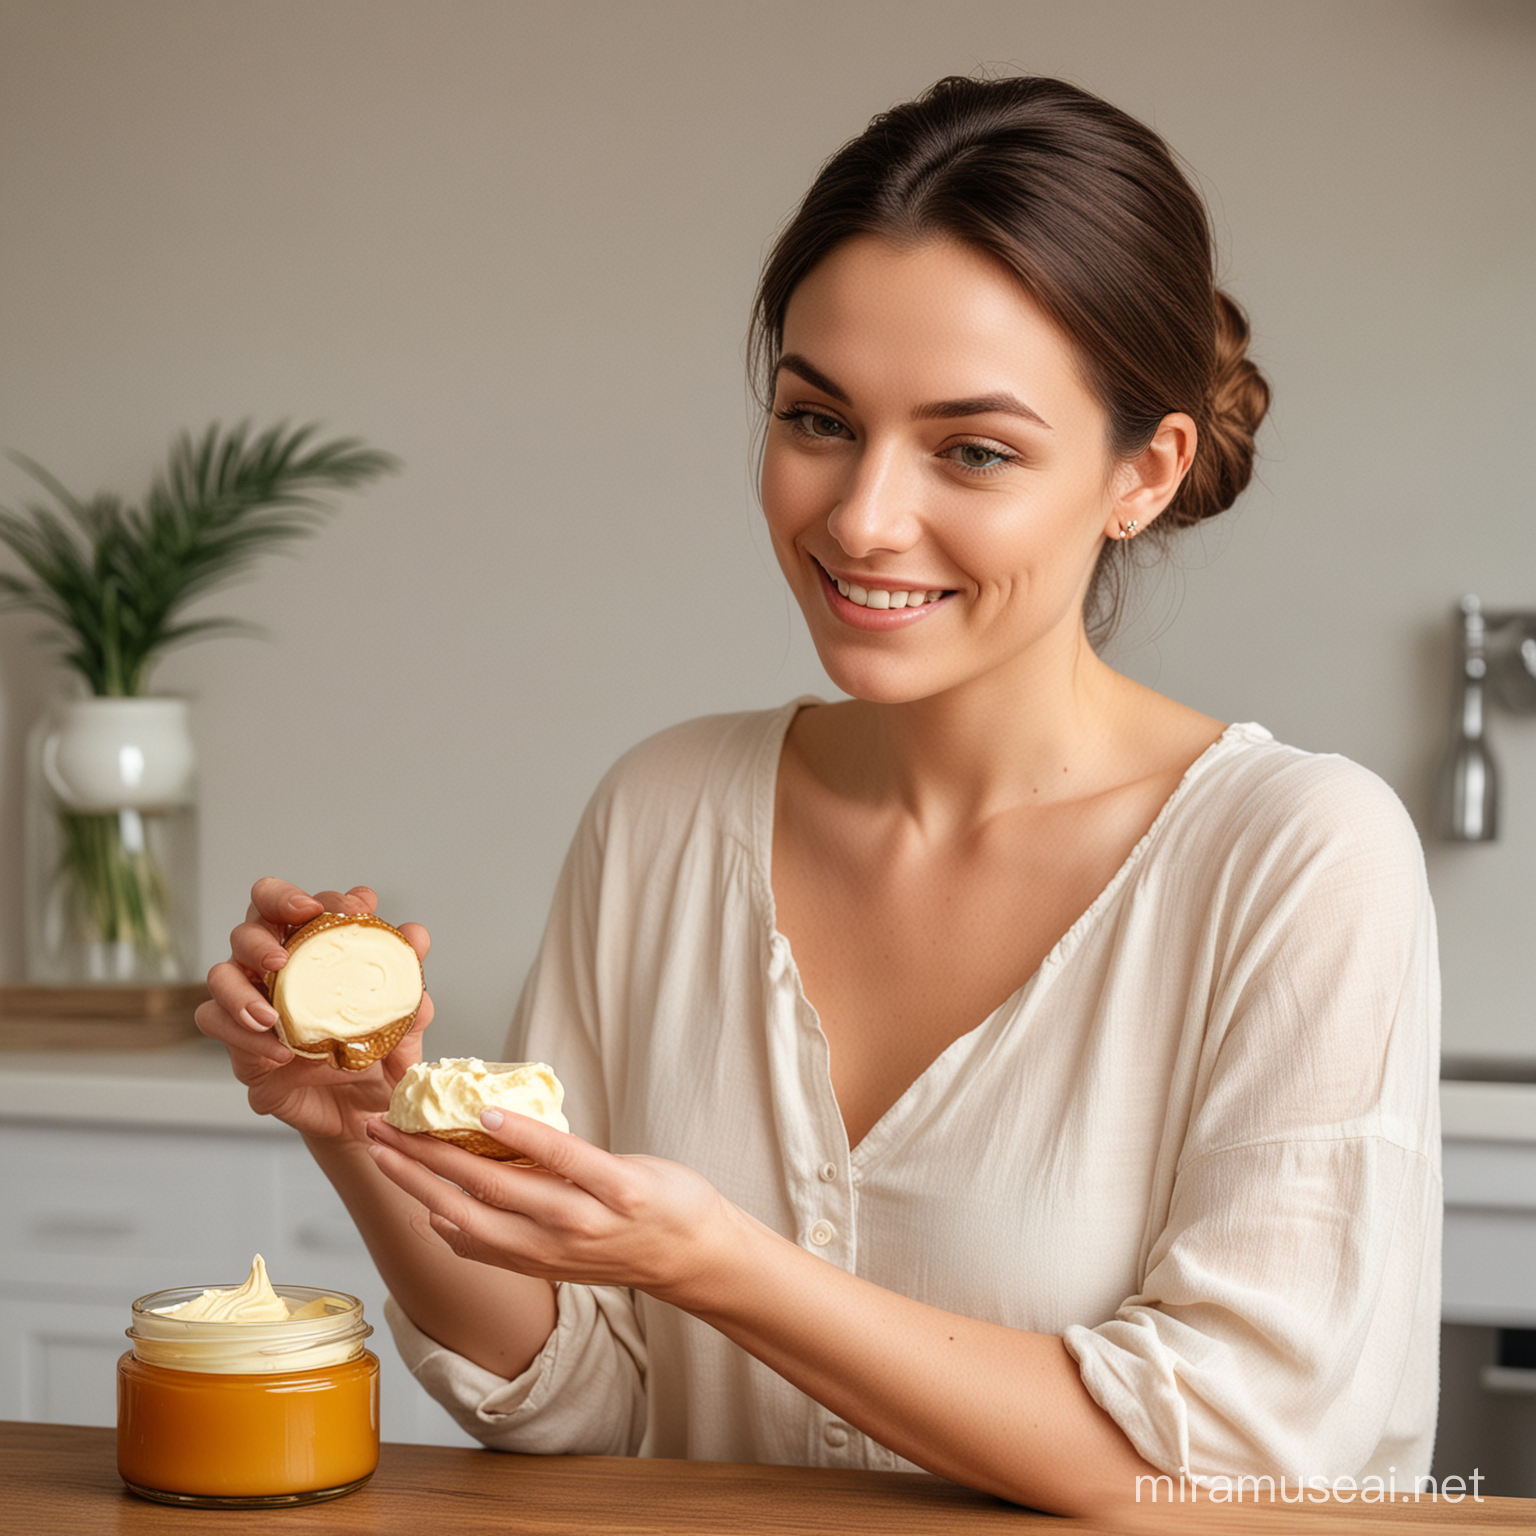 A beautiful woman presenting a body butter from an amber glass jar, showing how the butter looks like